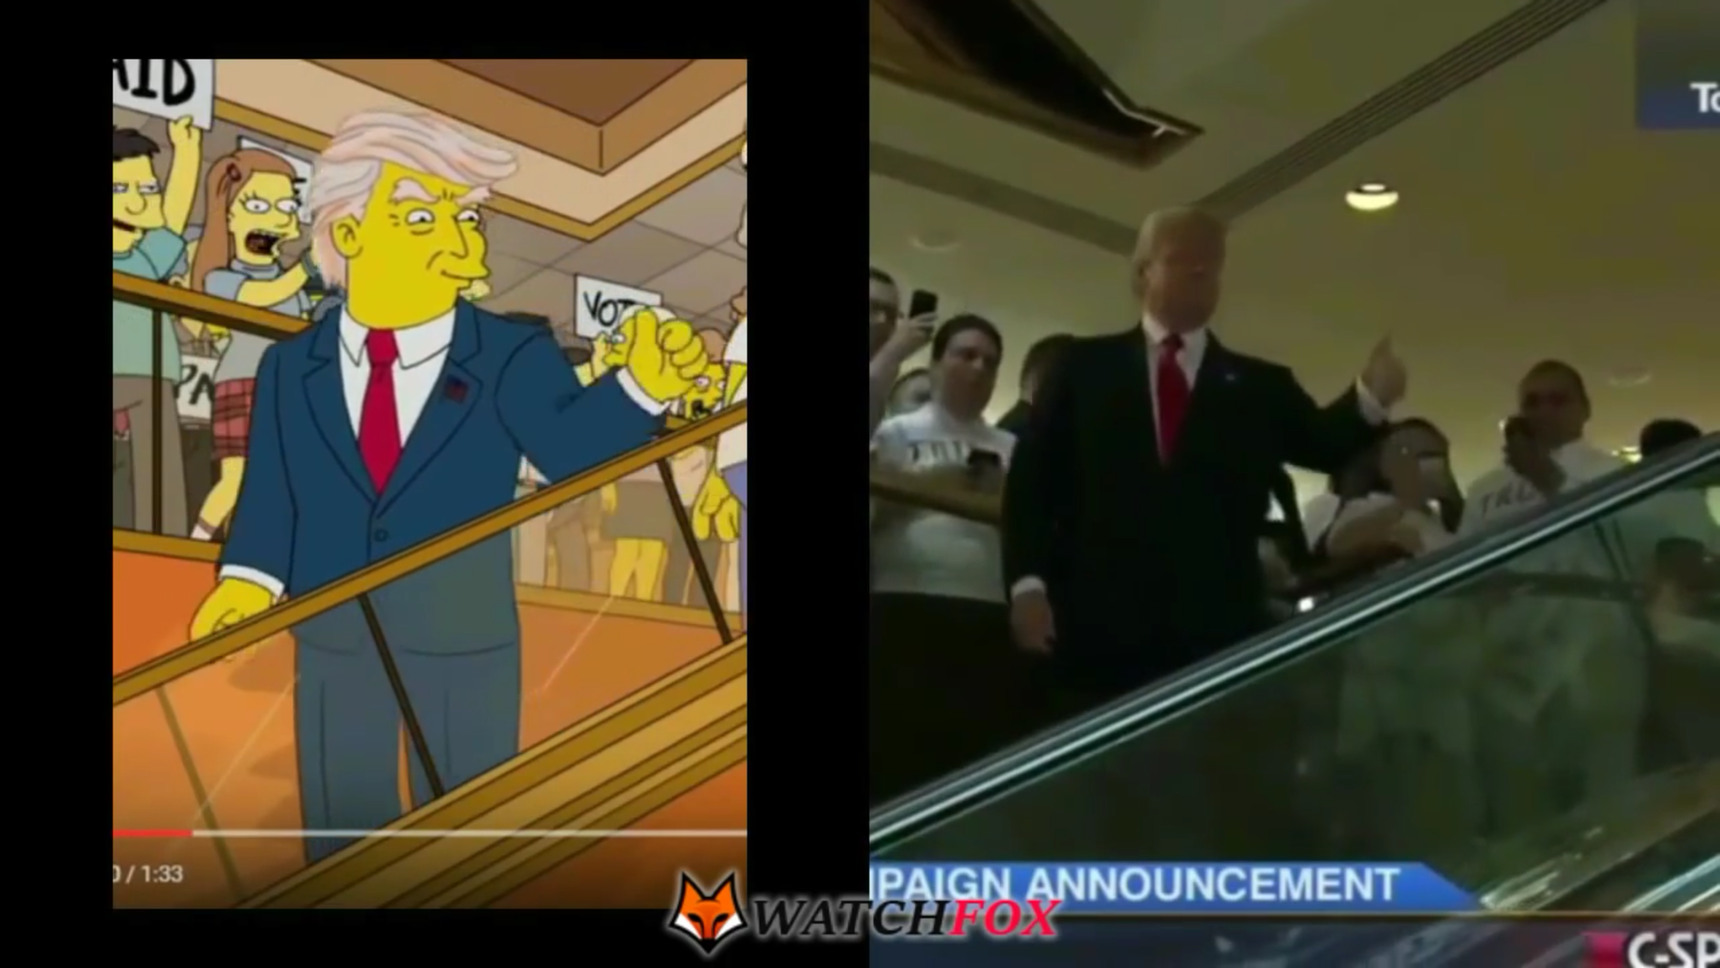 At the year 2000, Trump was the US presedent in the Simpsons - meme